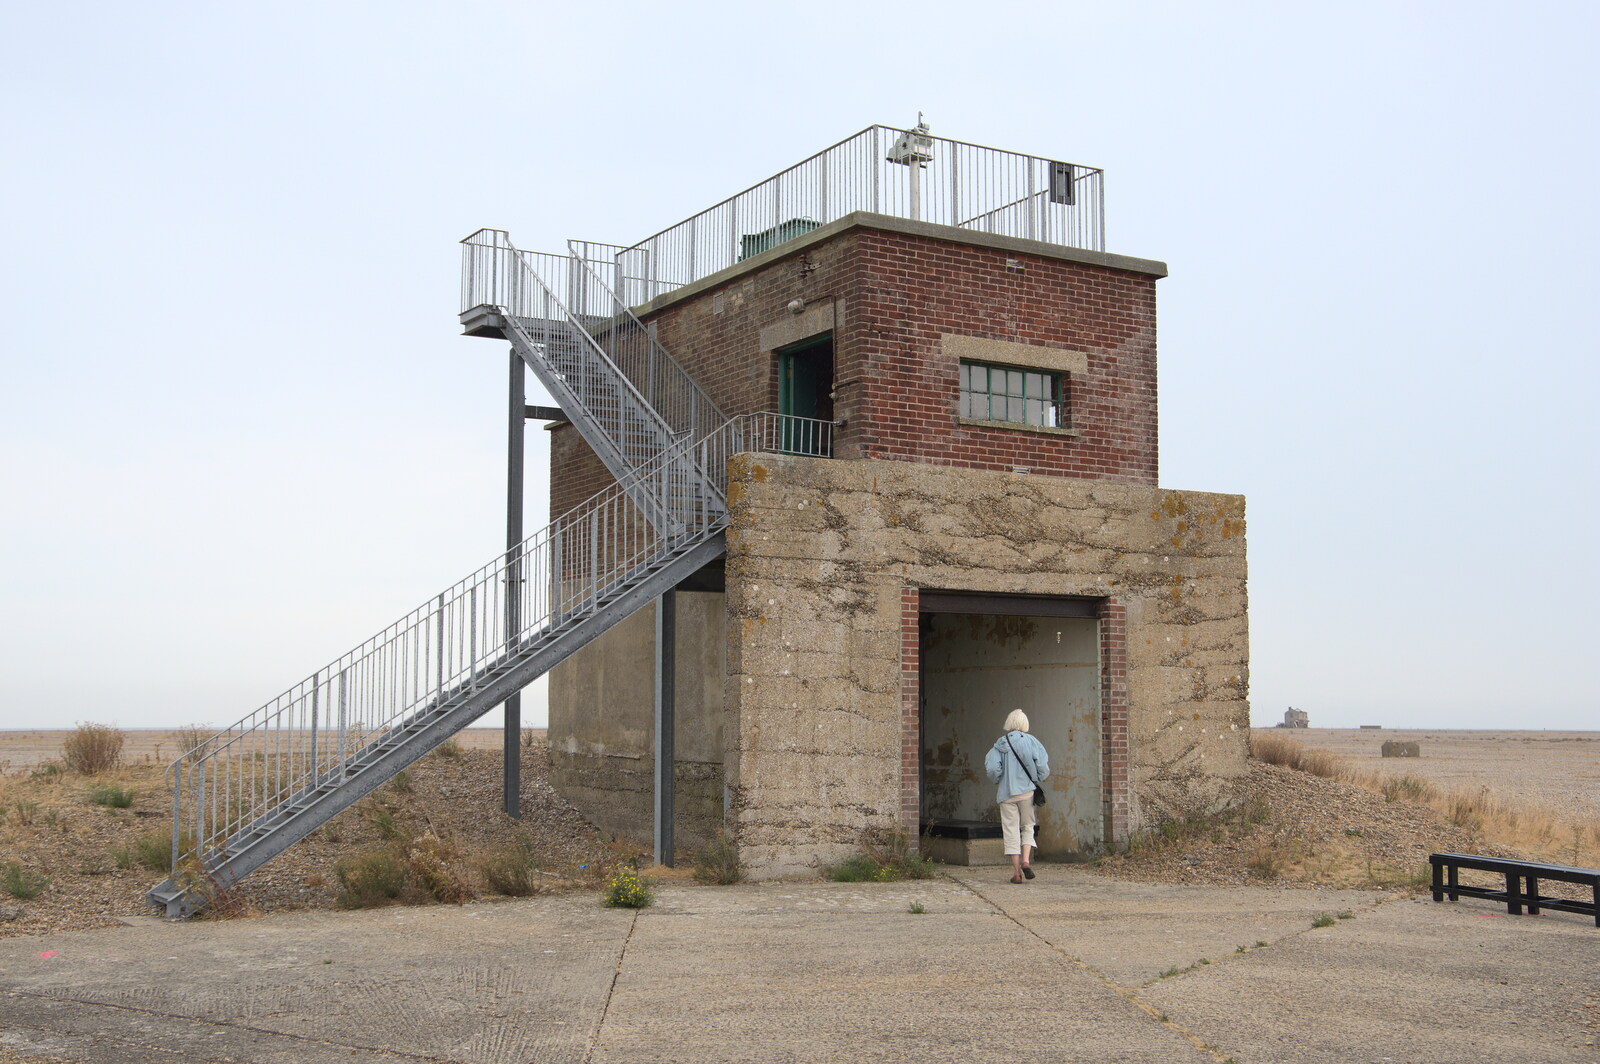 We visit the Bomb Ballistics building from A Trip to Orford Ness, Orford, Suffolk - 16th August 2022